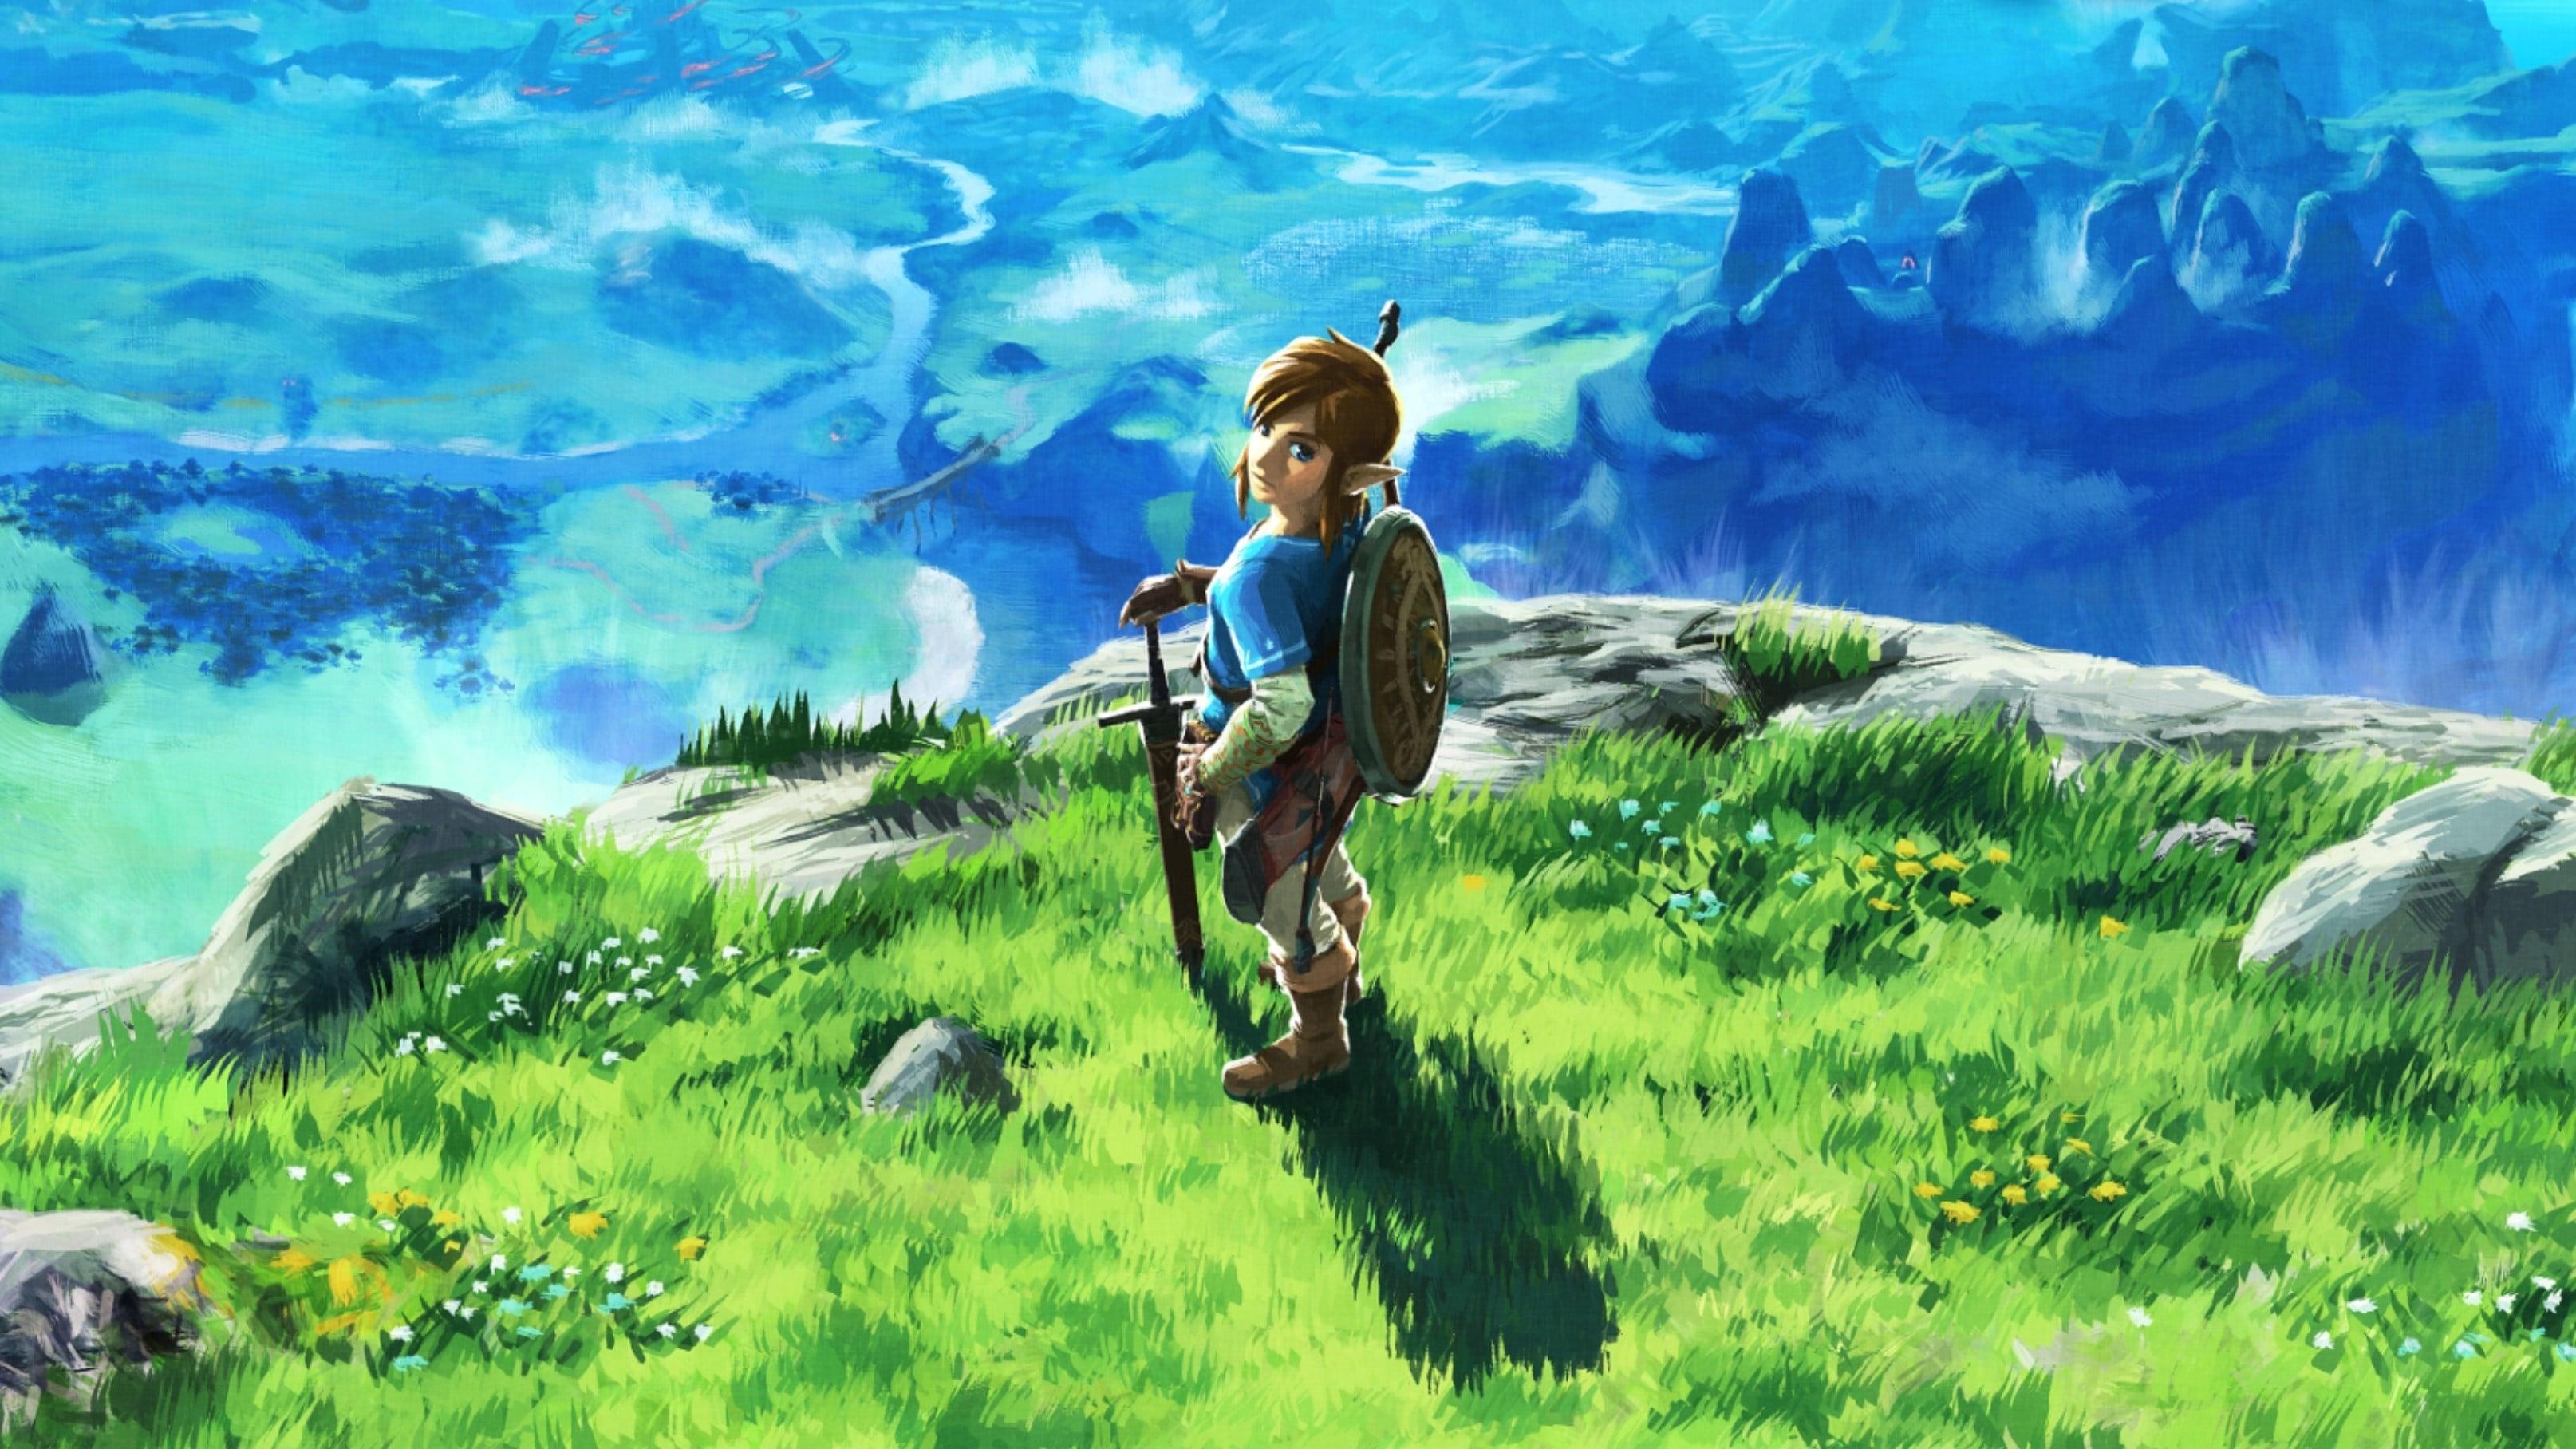 The Making of The Legend of Zelda: Breath of the Wild backdrop